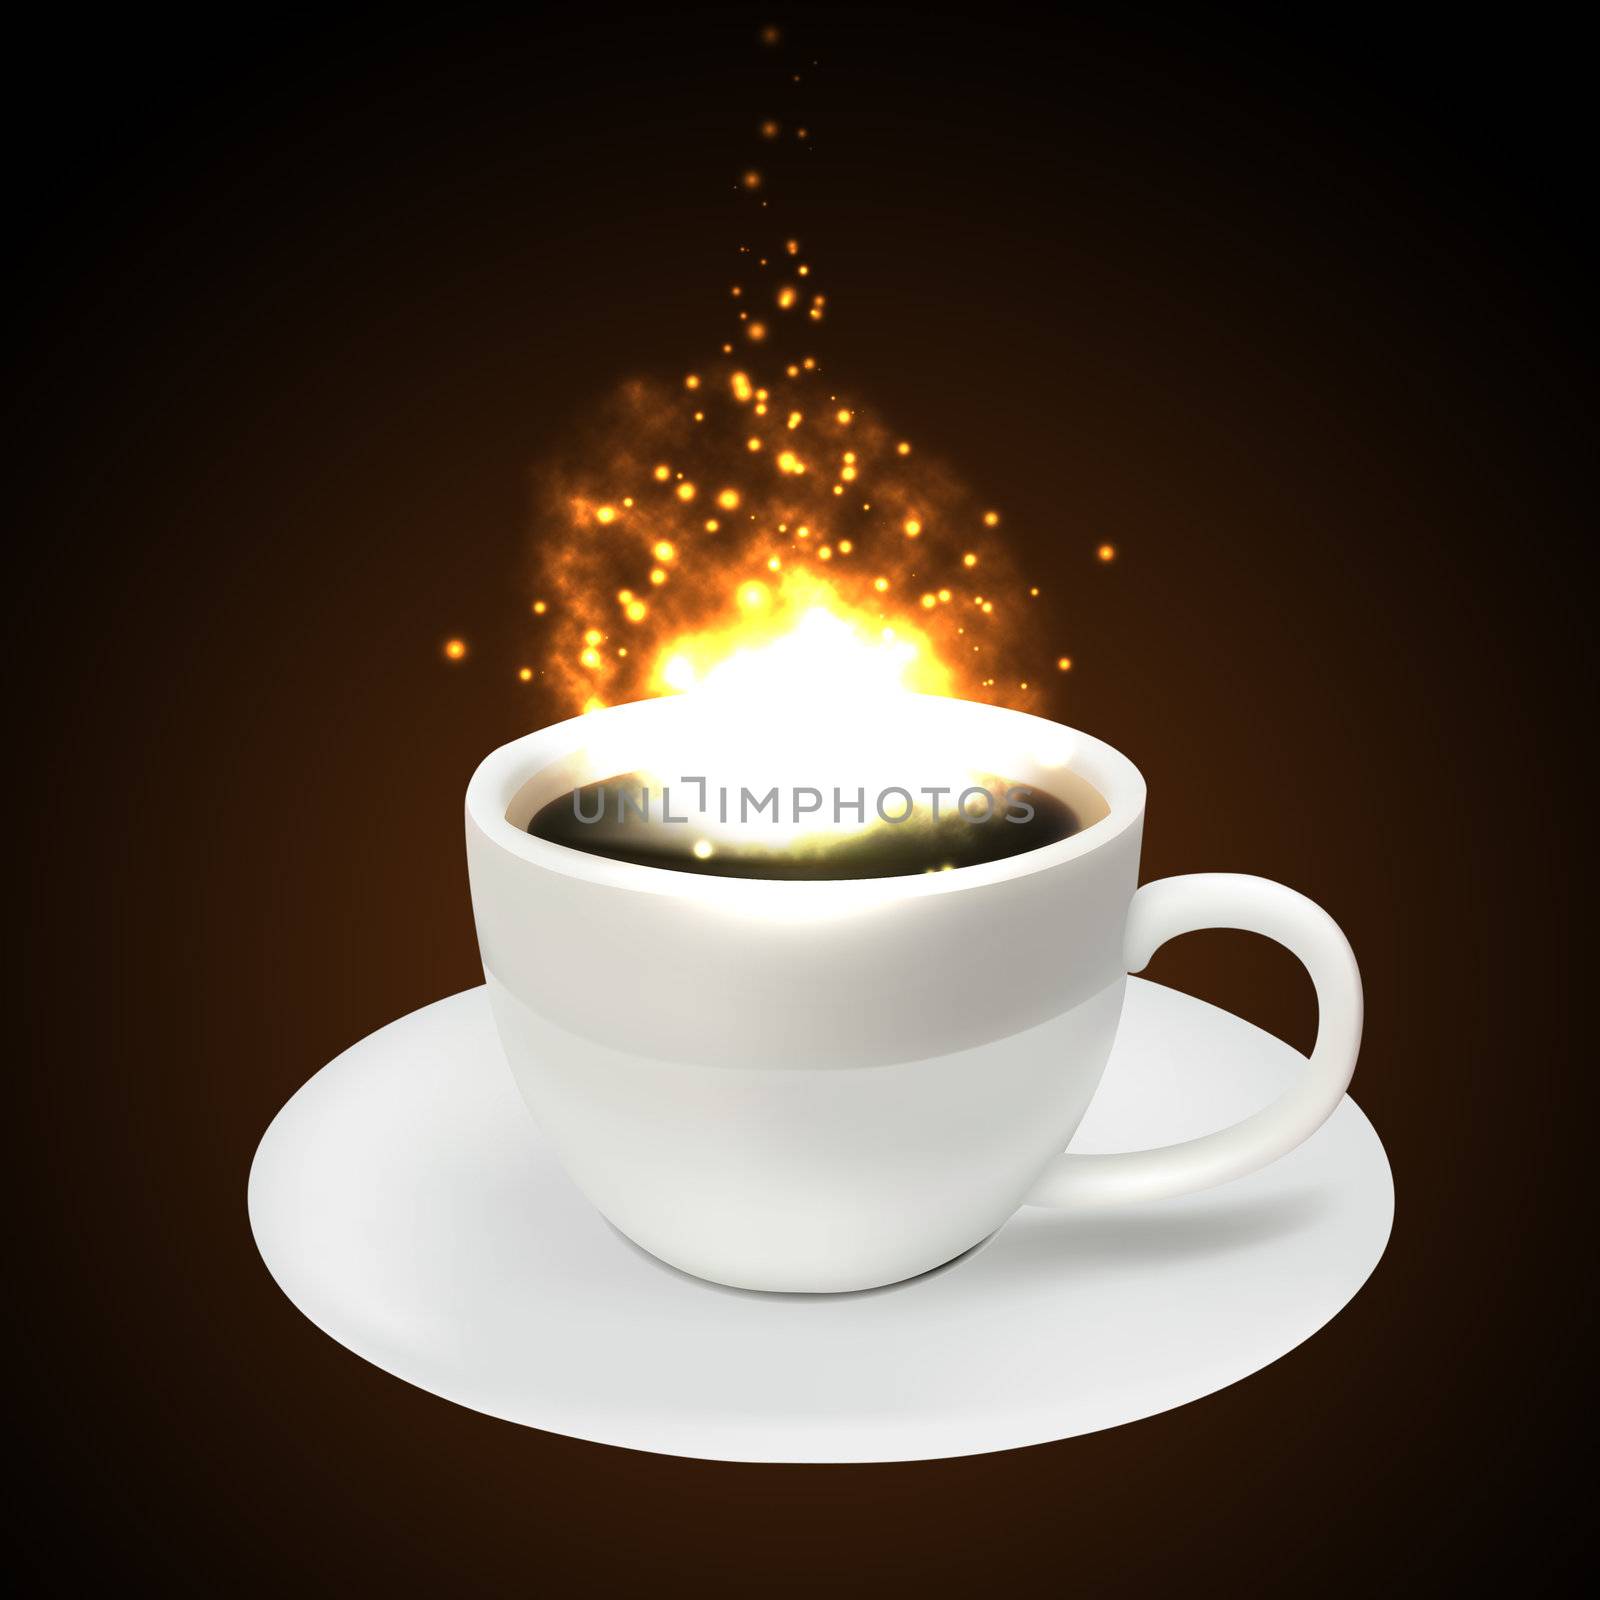 Coffee cup and cascade of sparks on a dark background